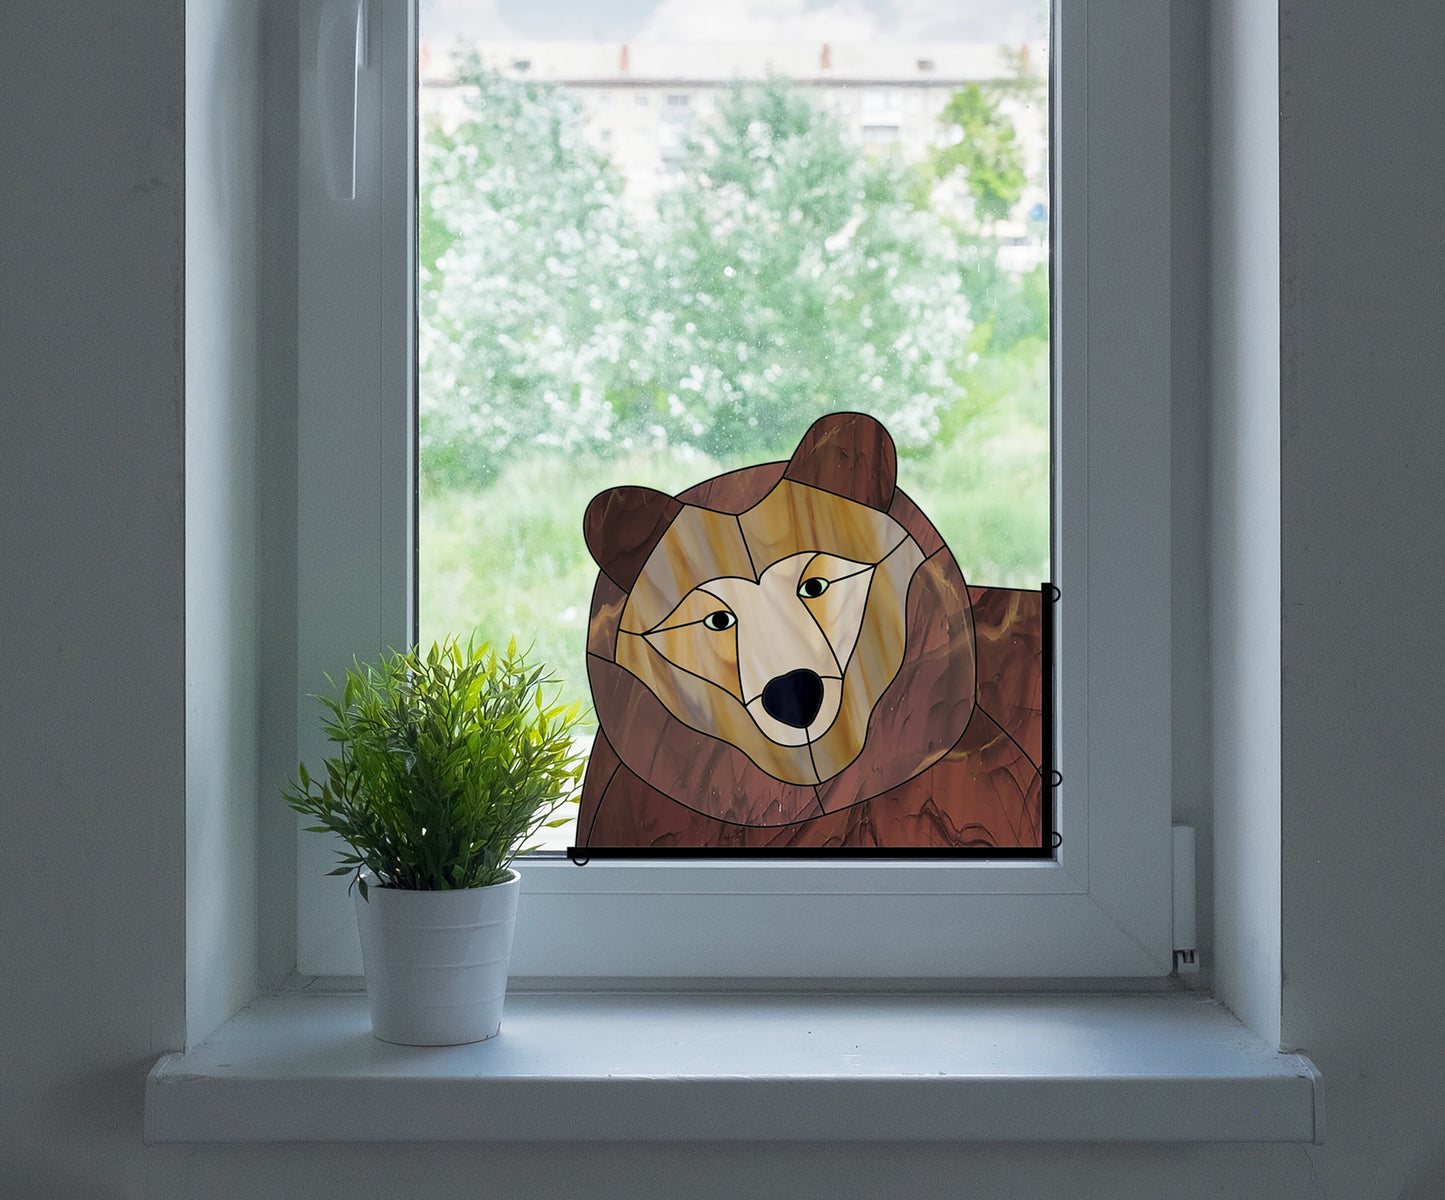 Stained glass pattern for a bear peeking in the window, instant PDF download, shown in a window with a plant